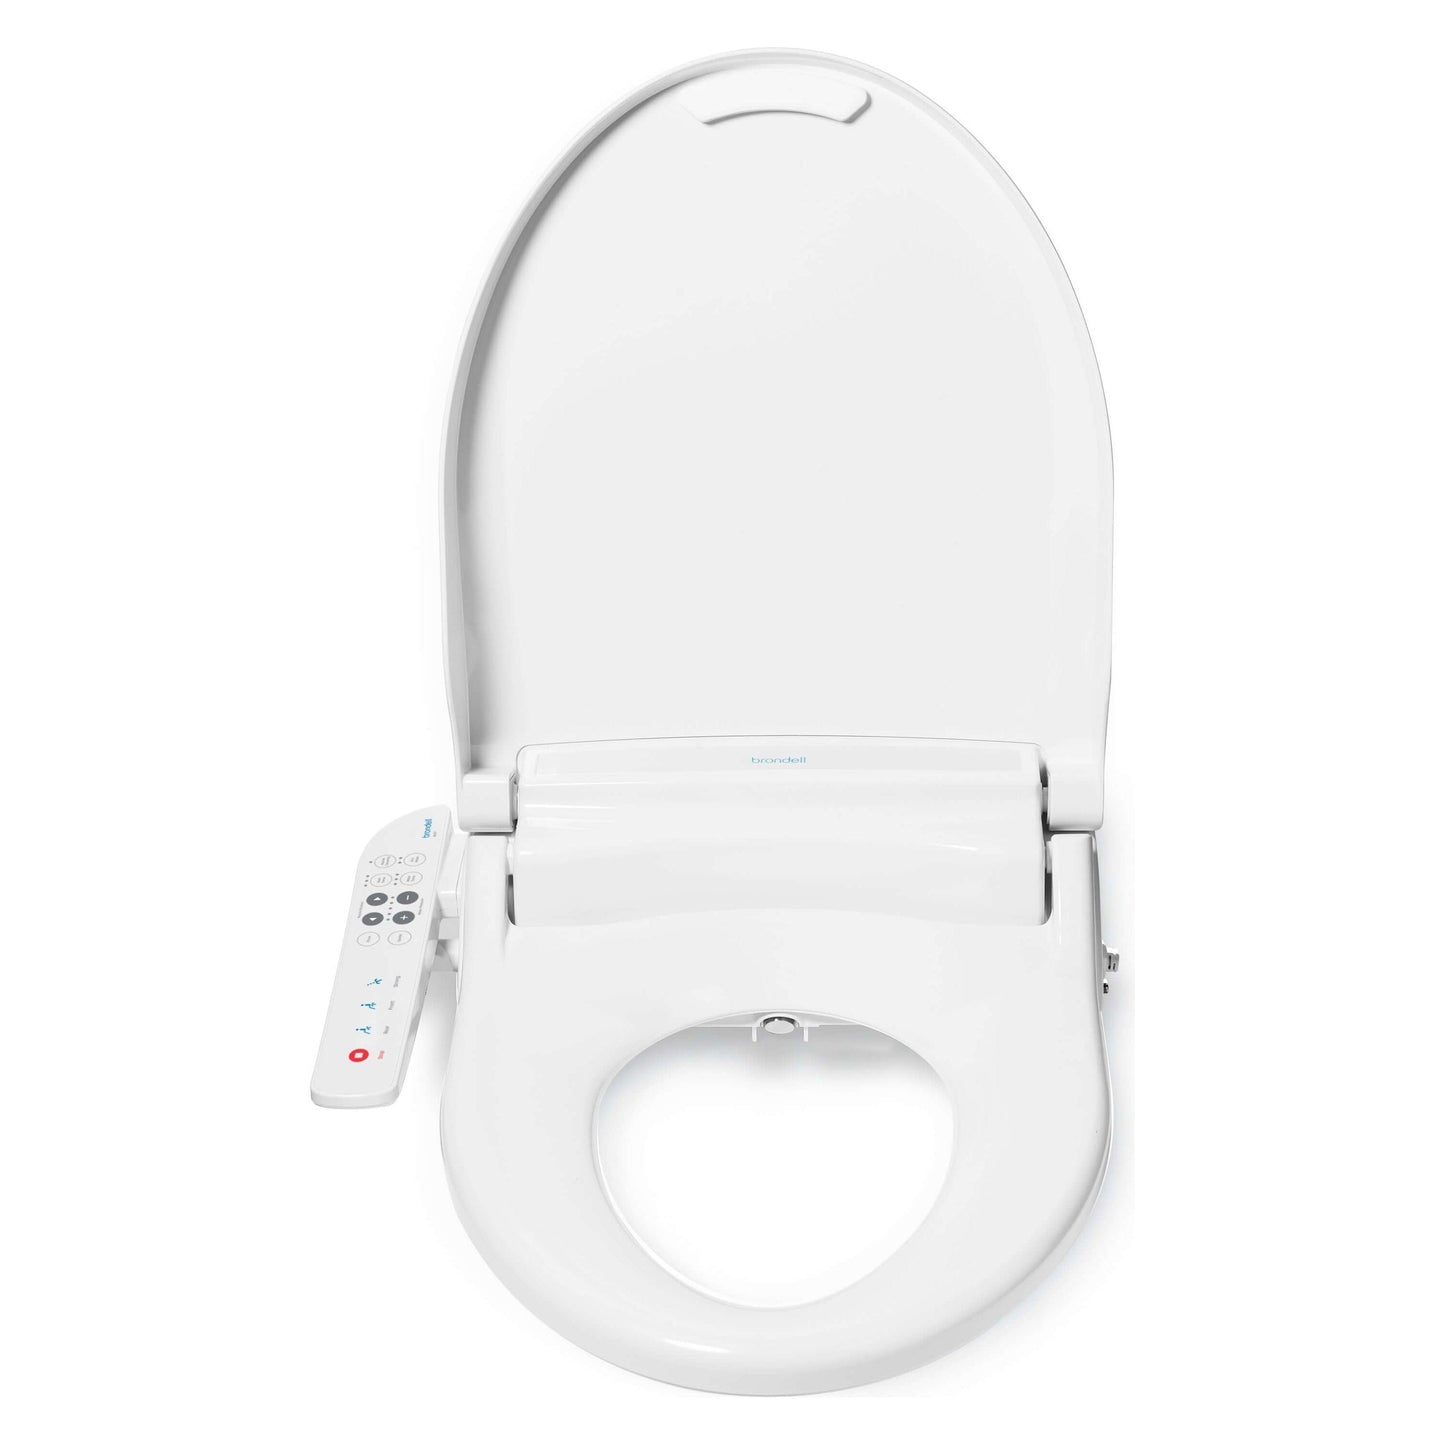 Swash Select BL67 Bidet Seat - front view with lid open